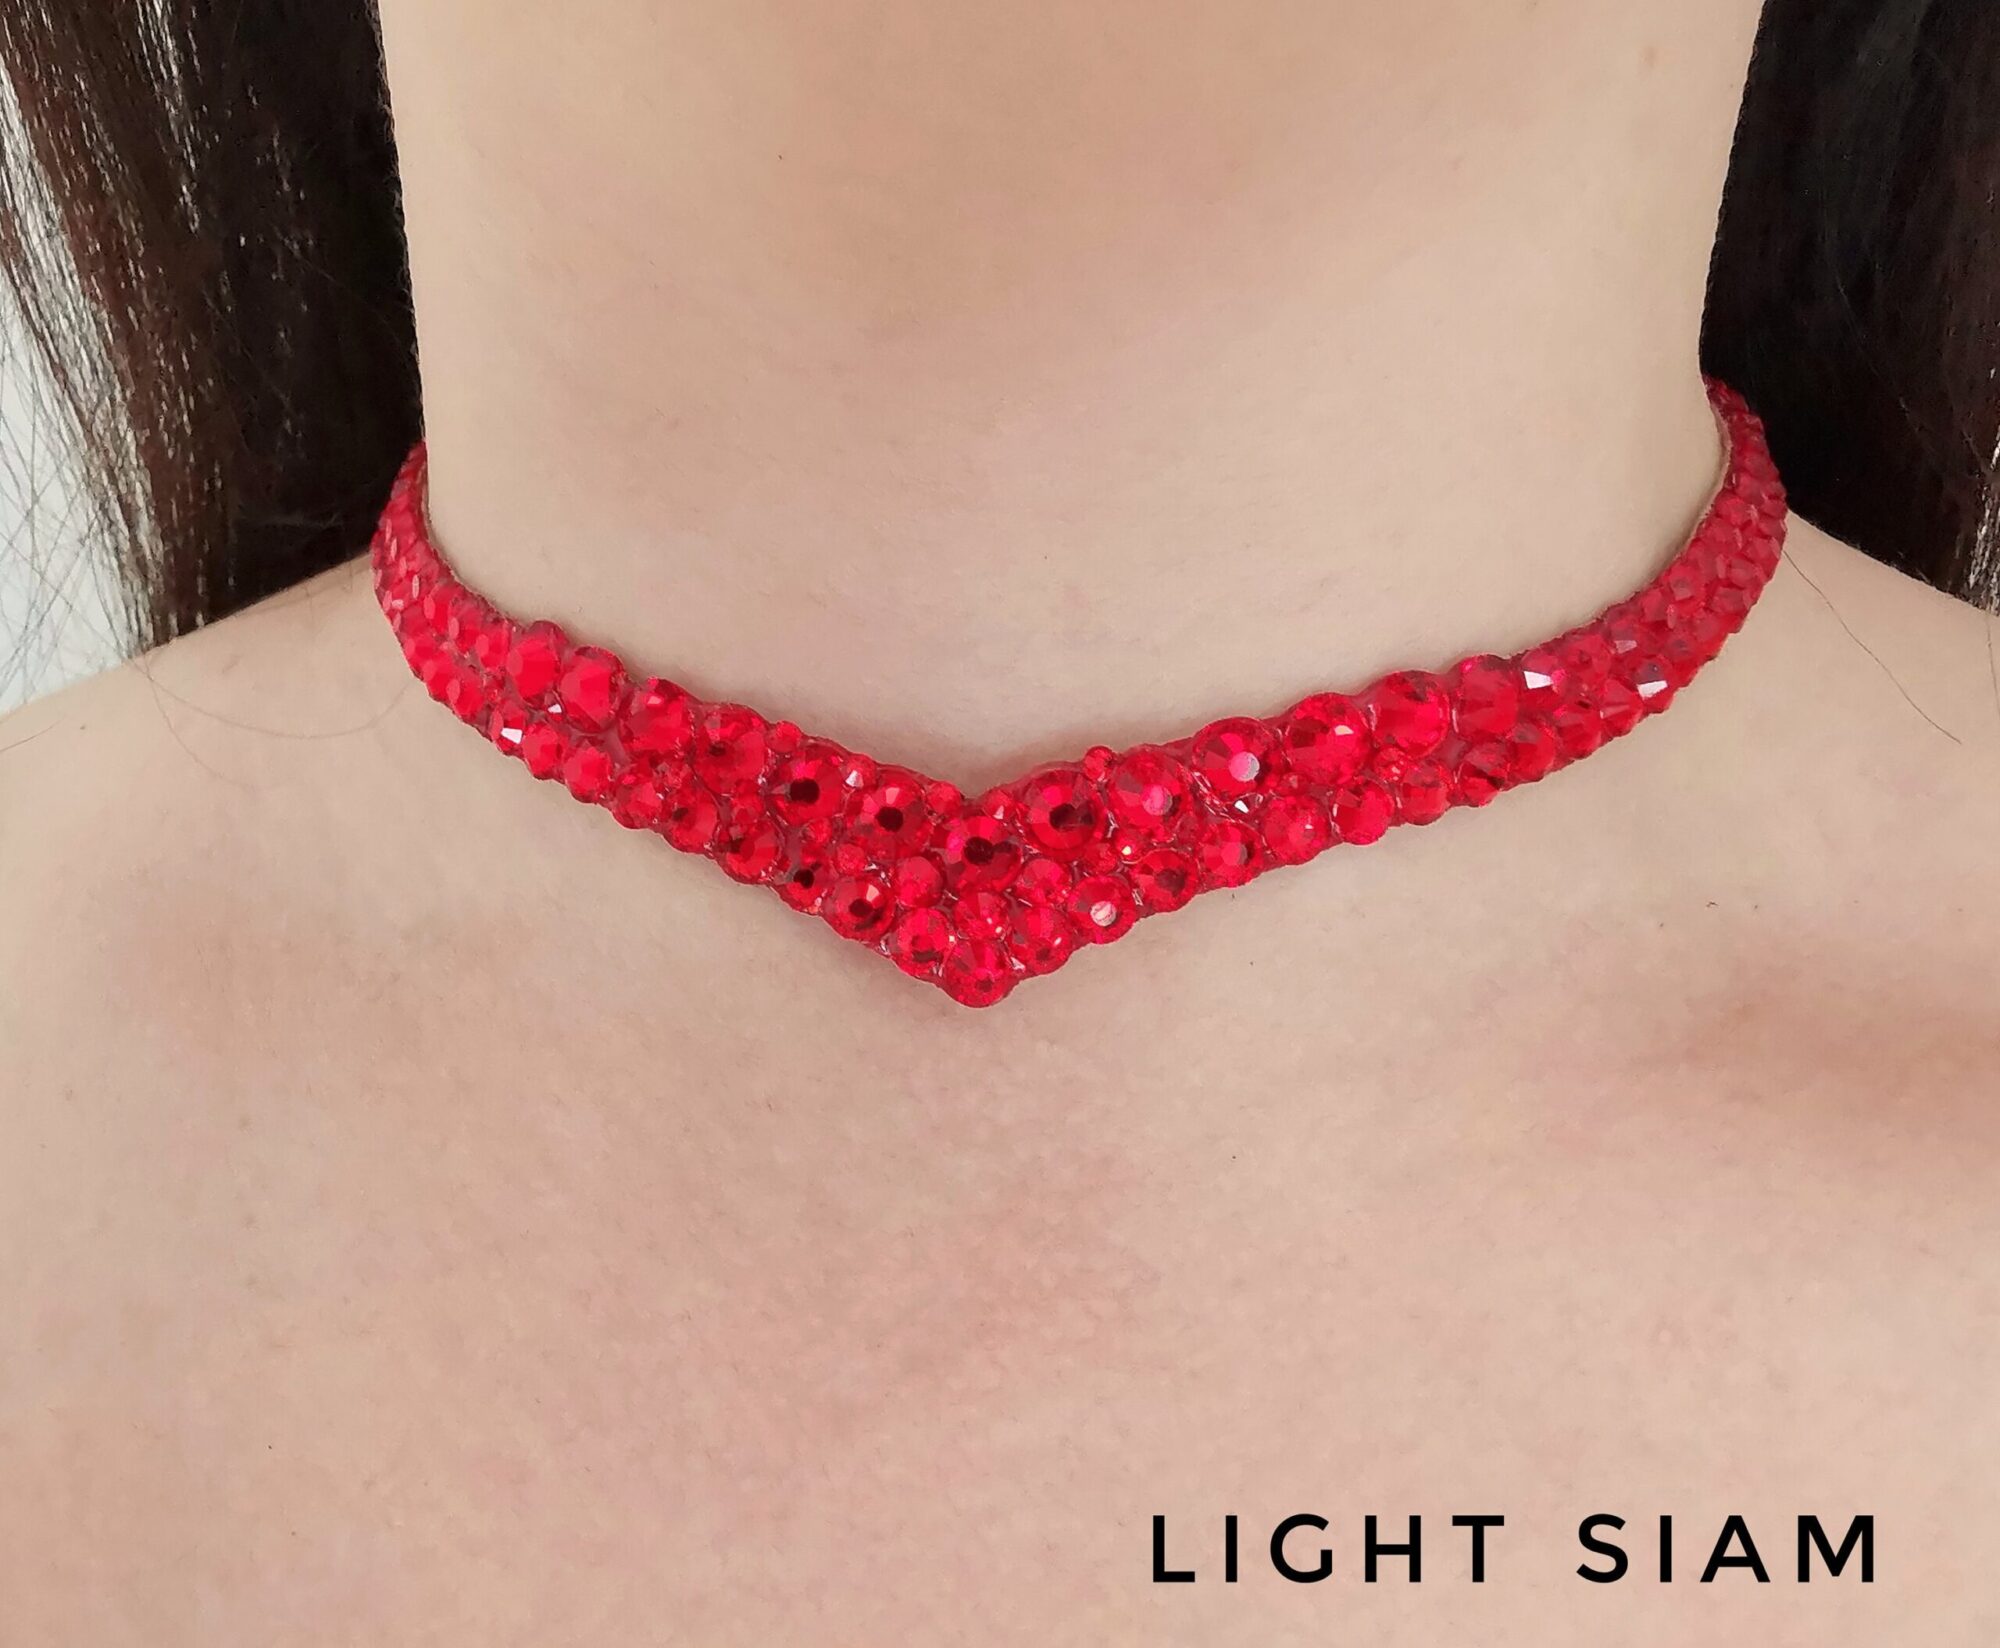 Ballroom red siam necklace with crystals